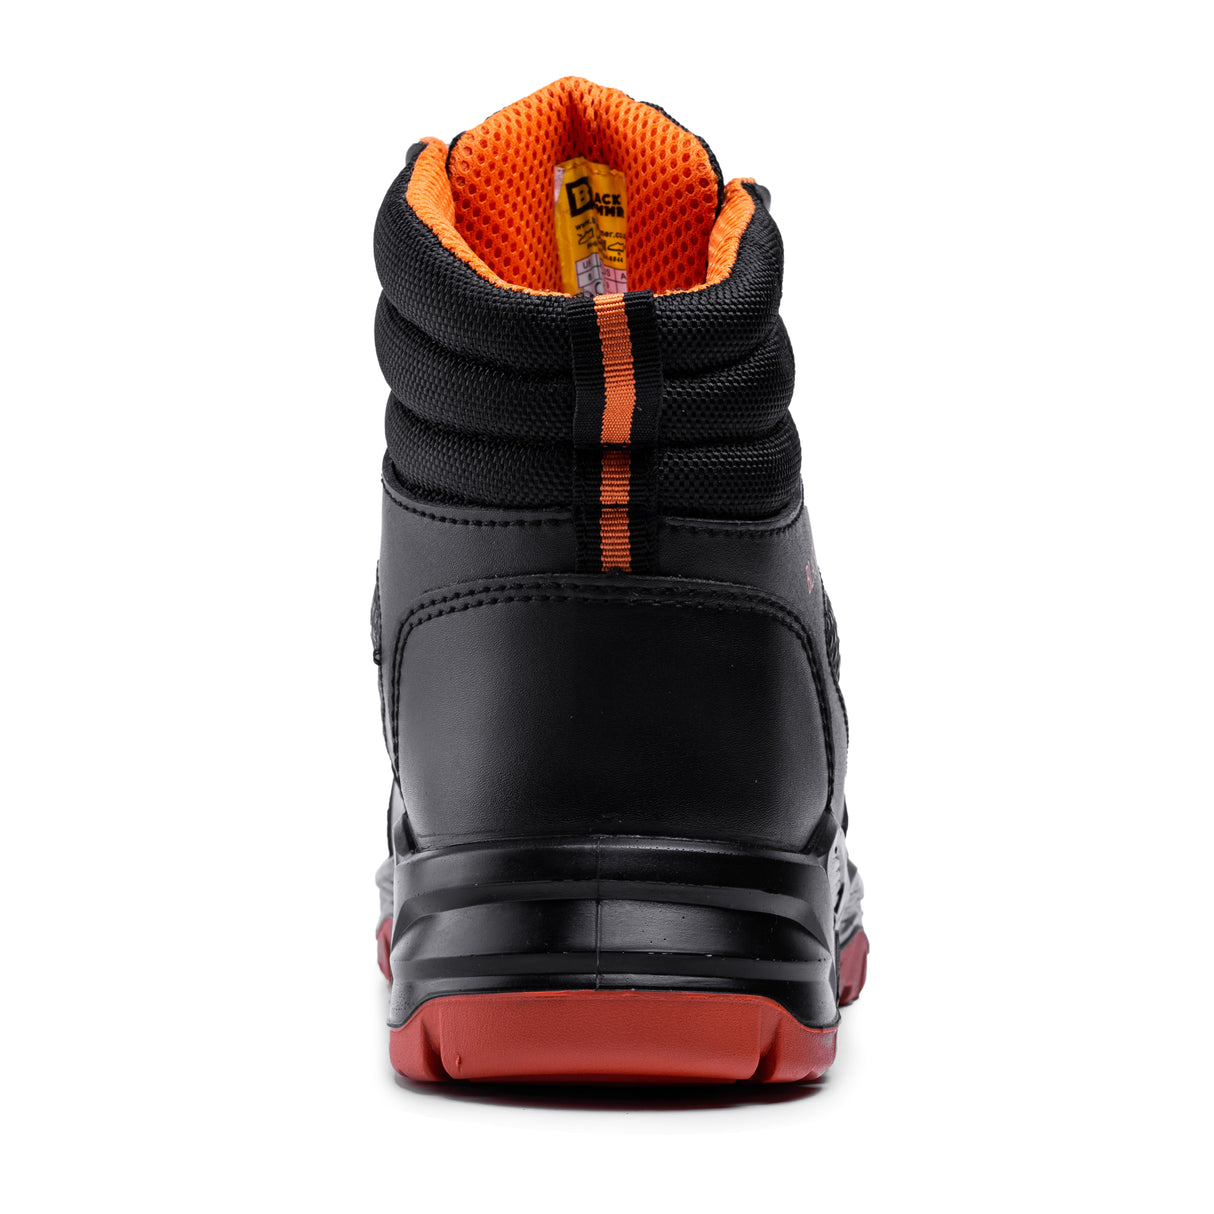 multi functional safety boots back details